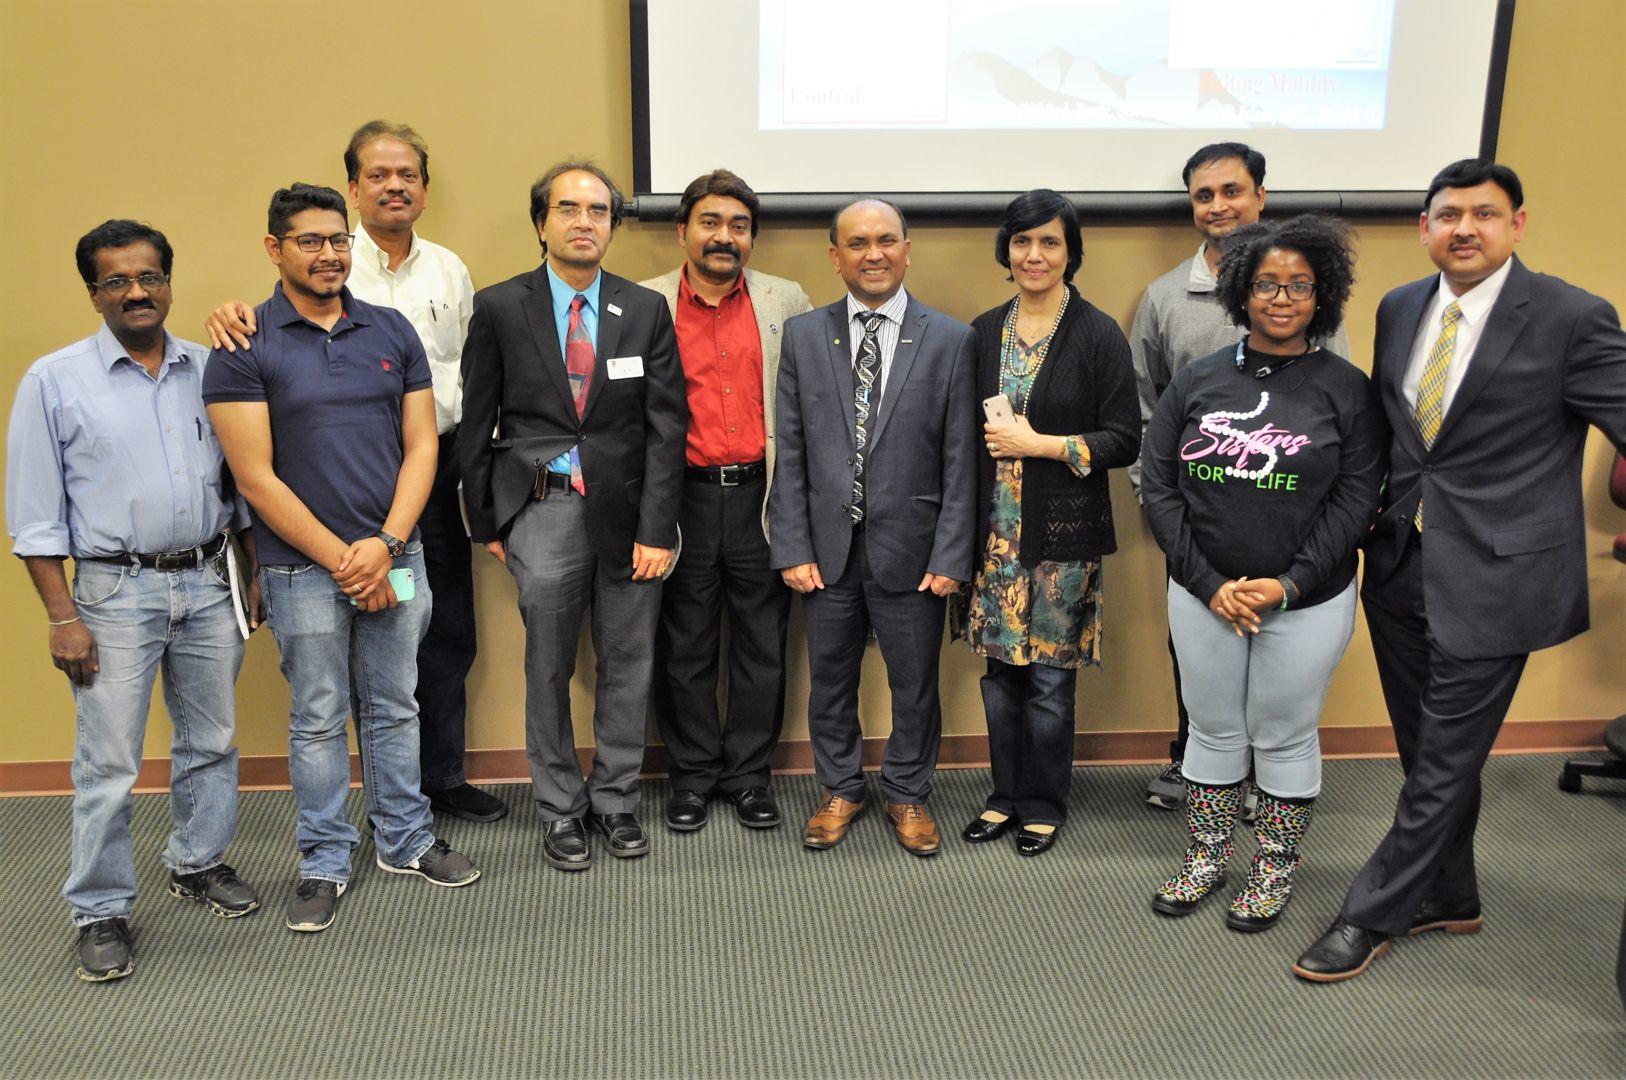 Dr. Md. Tofazzal Islam (center) poses for a photo with FVSU researchers and graduate students.